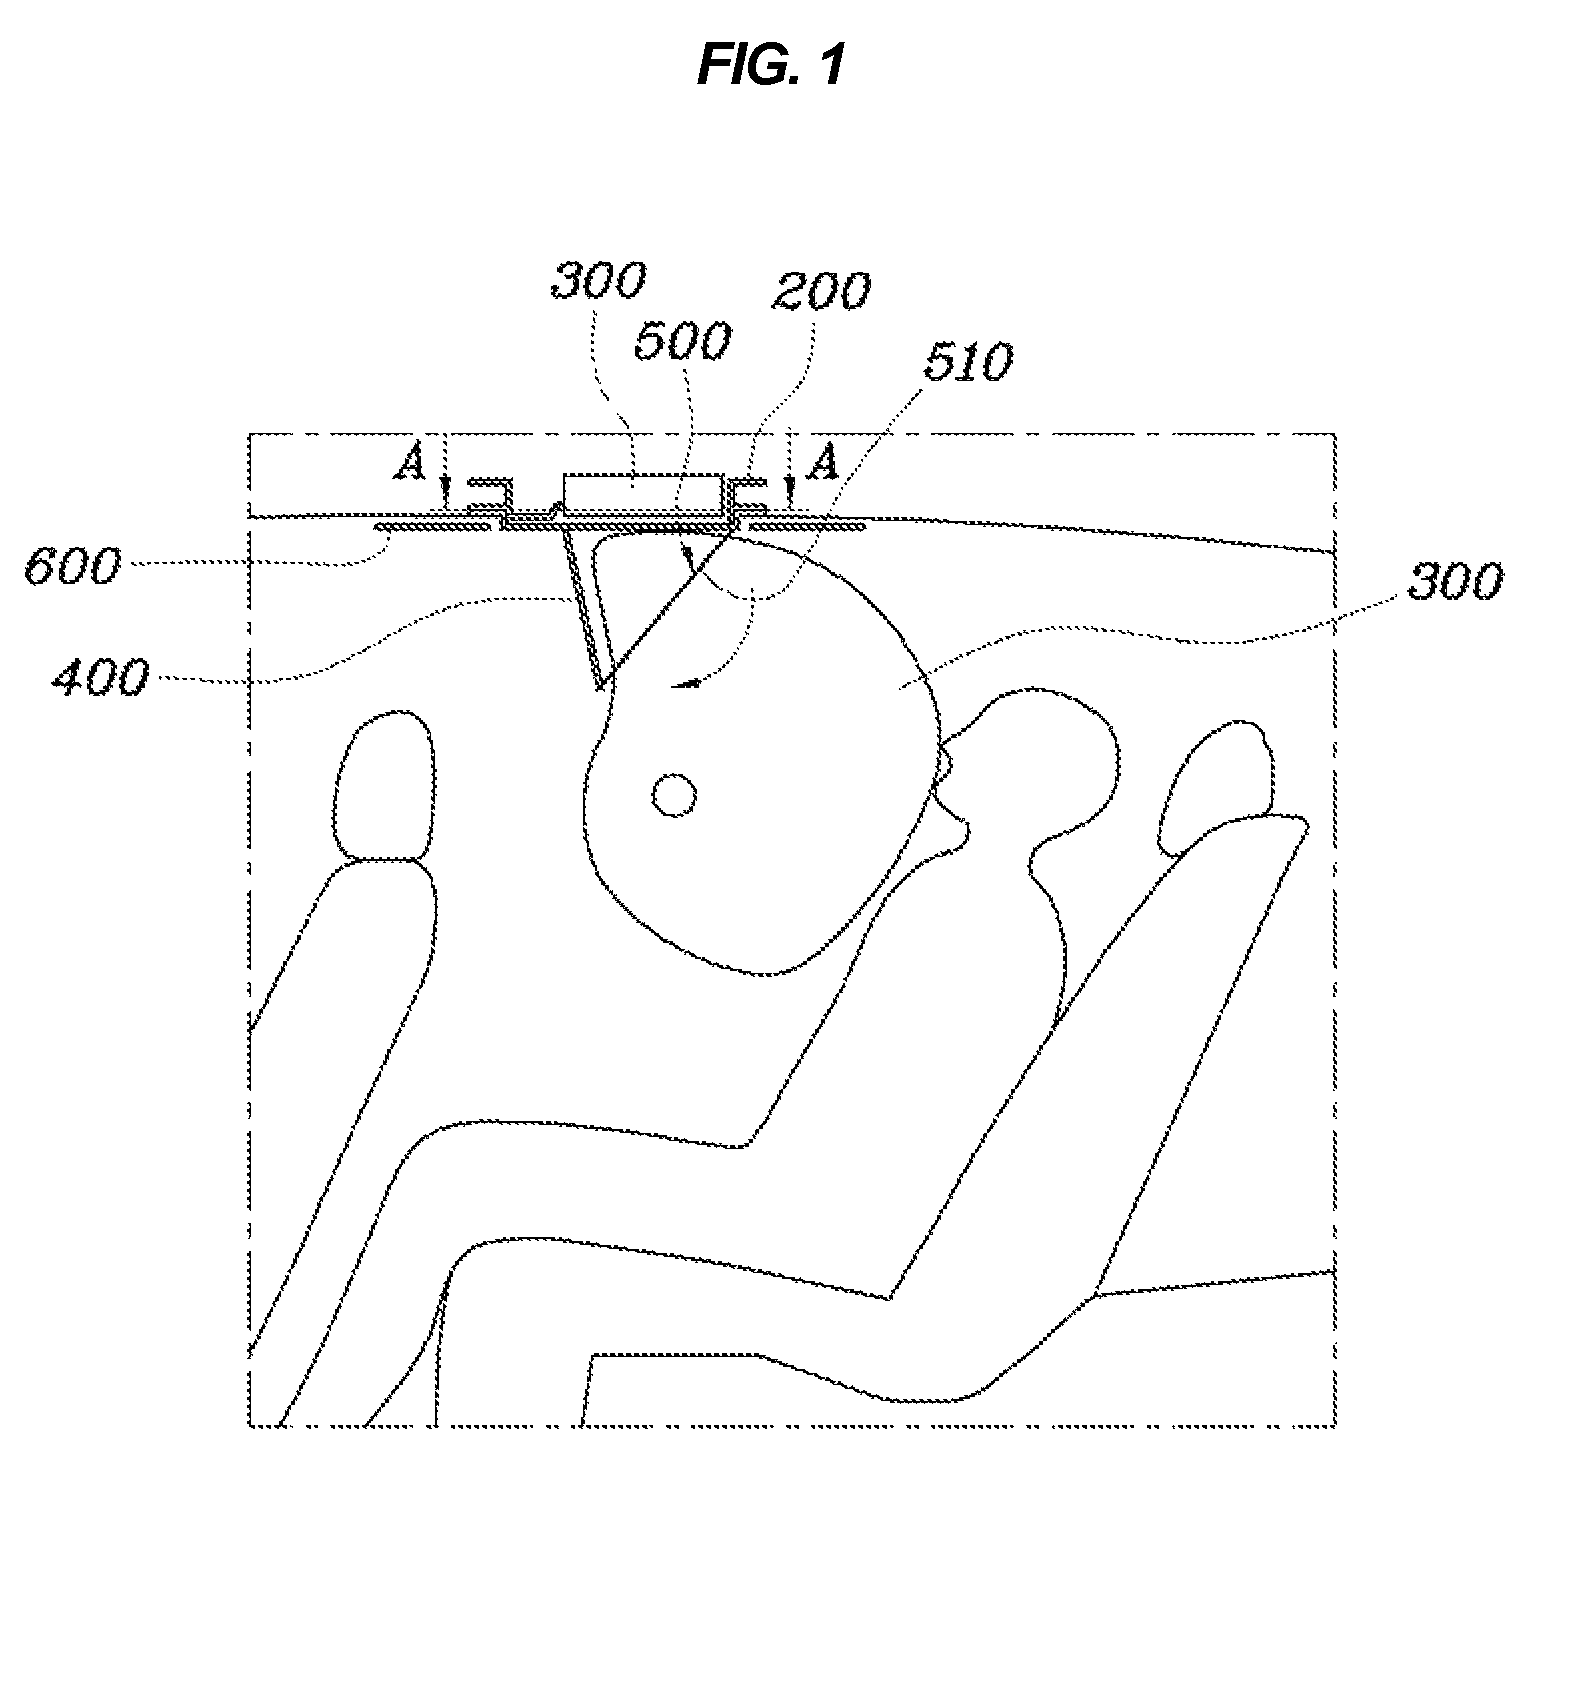 Roof airbag apparatus with airbag door having limited opening angle